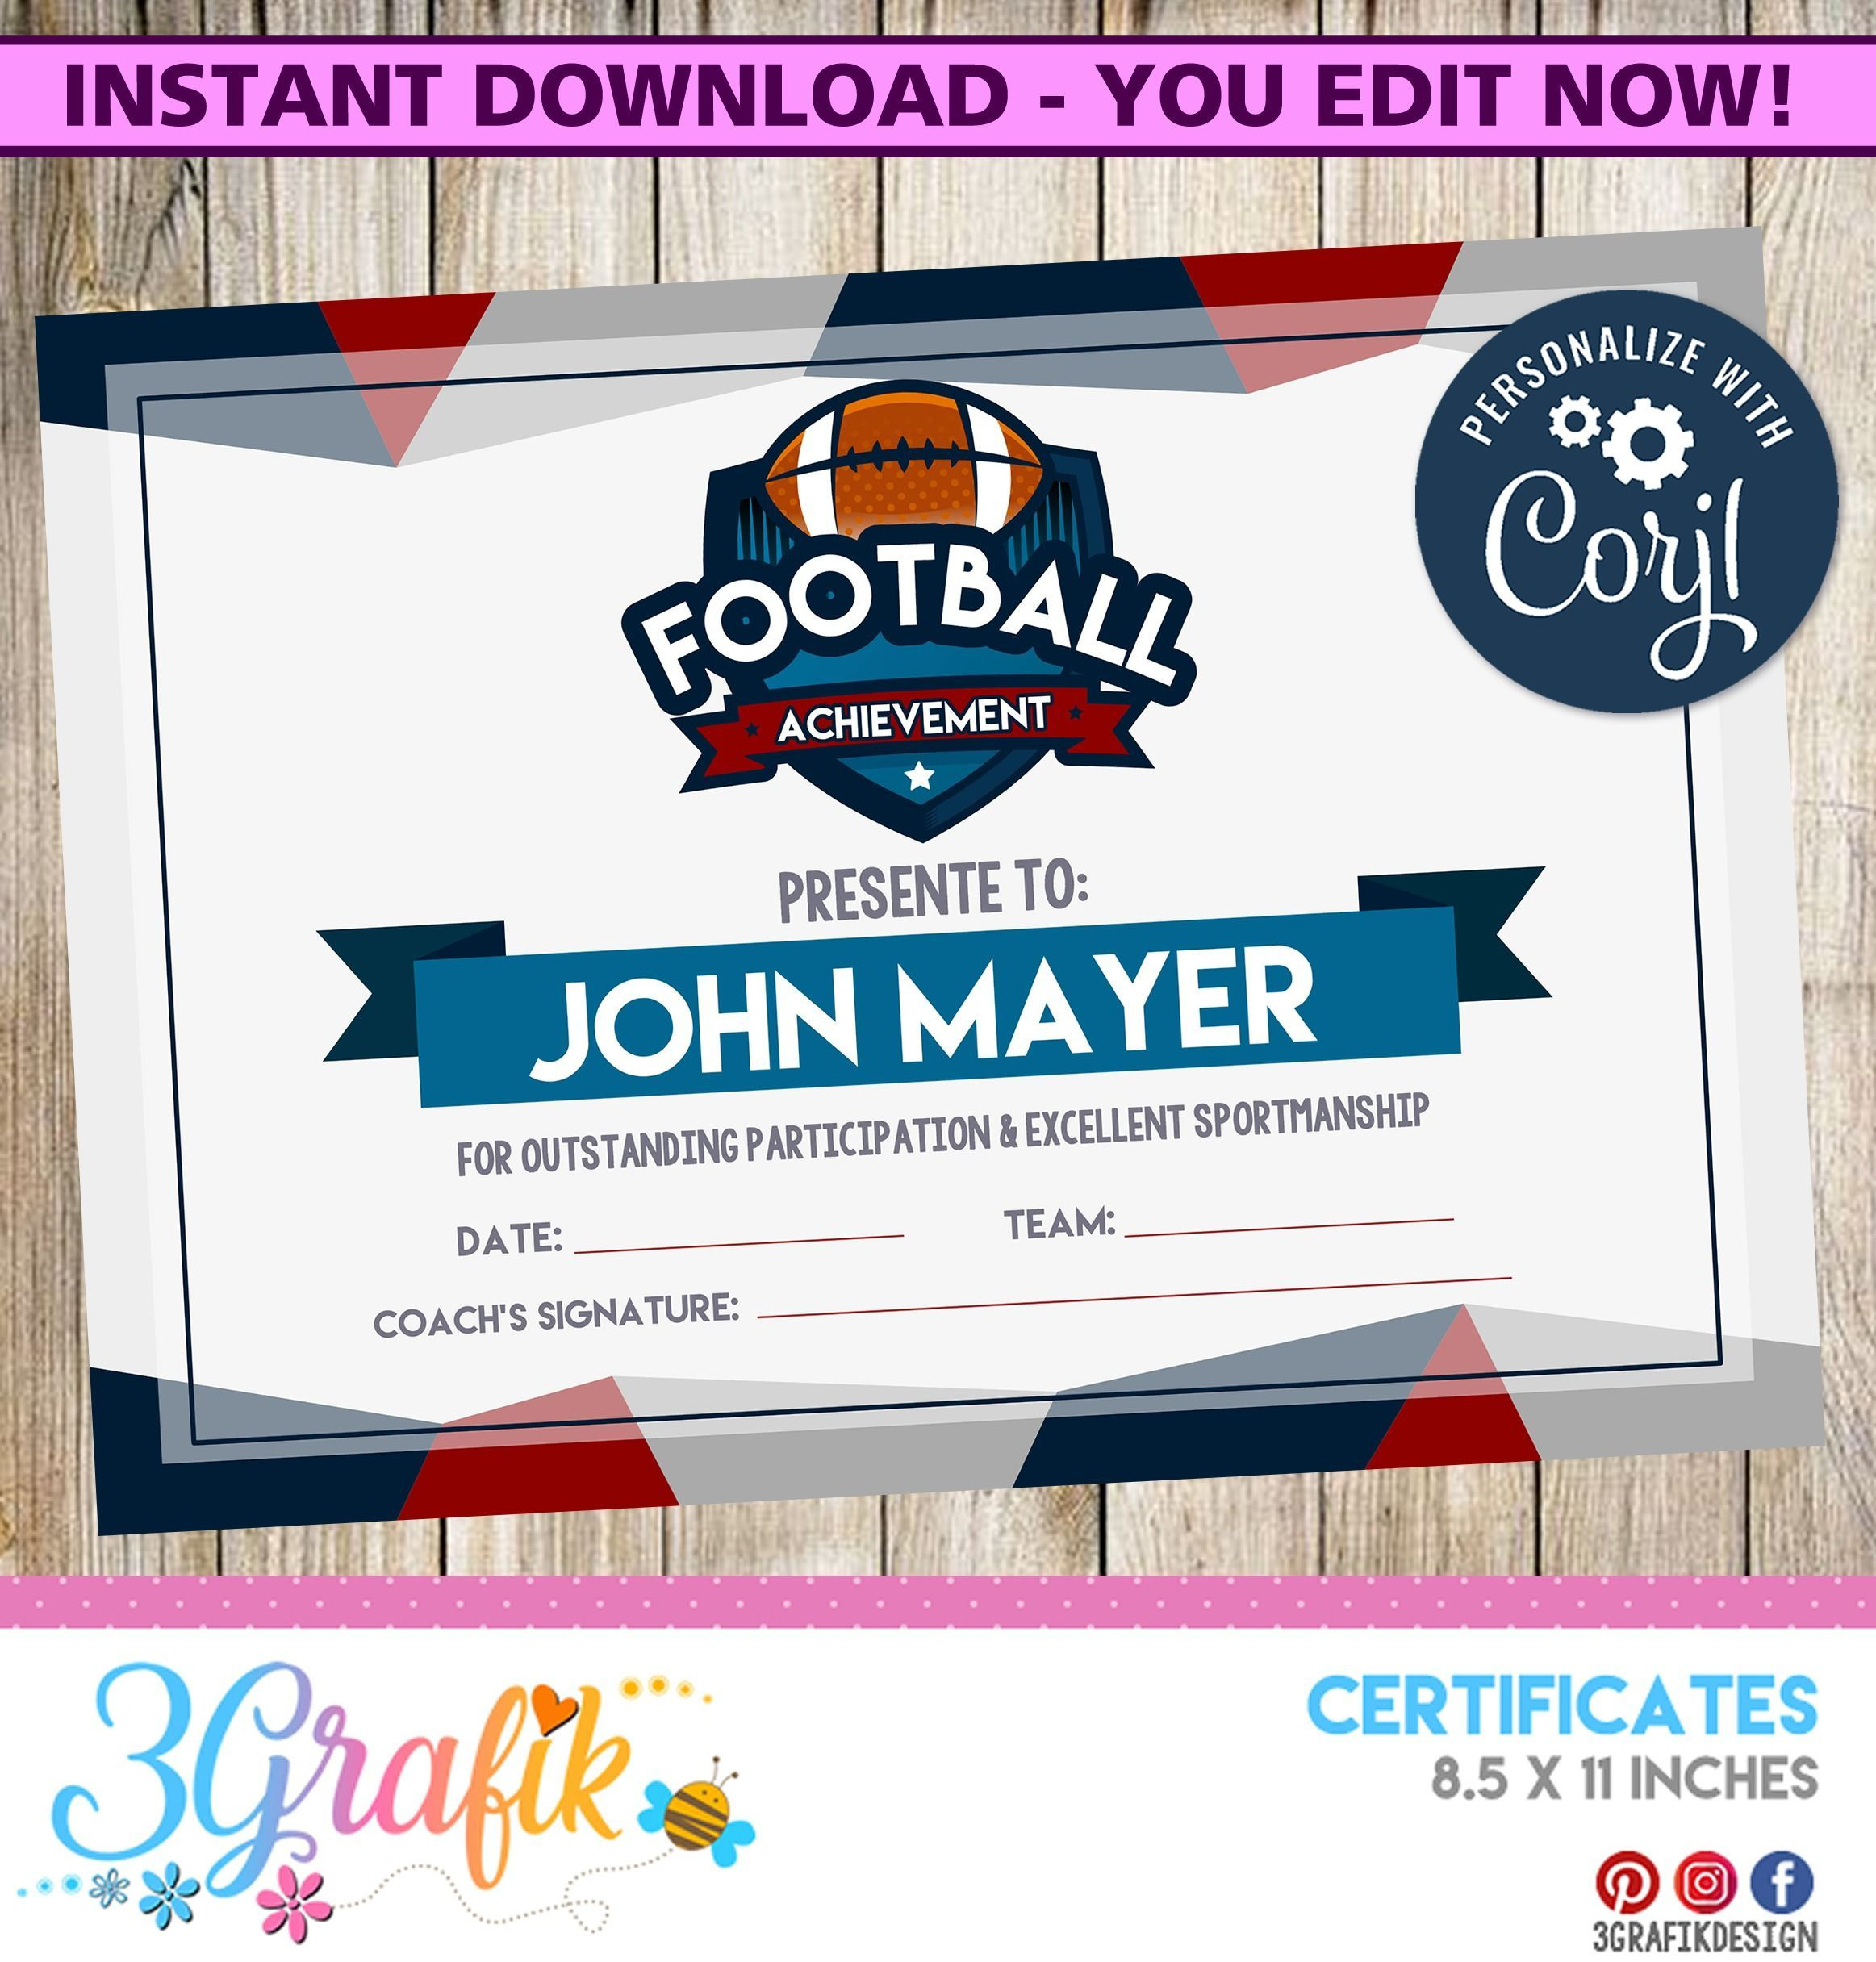 Quality Bowling Certificate Template Free 8 Frenzy Designs In 2021 throughout Amazing Bowling Certificate Template Free 8 Frenzy Designs